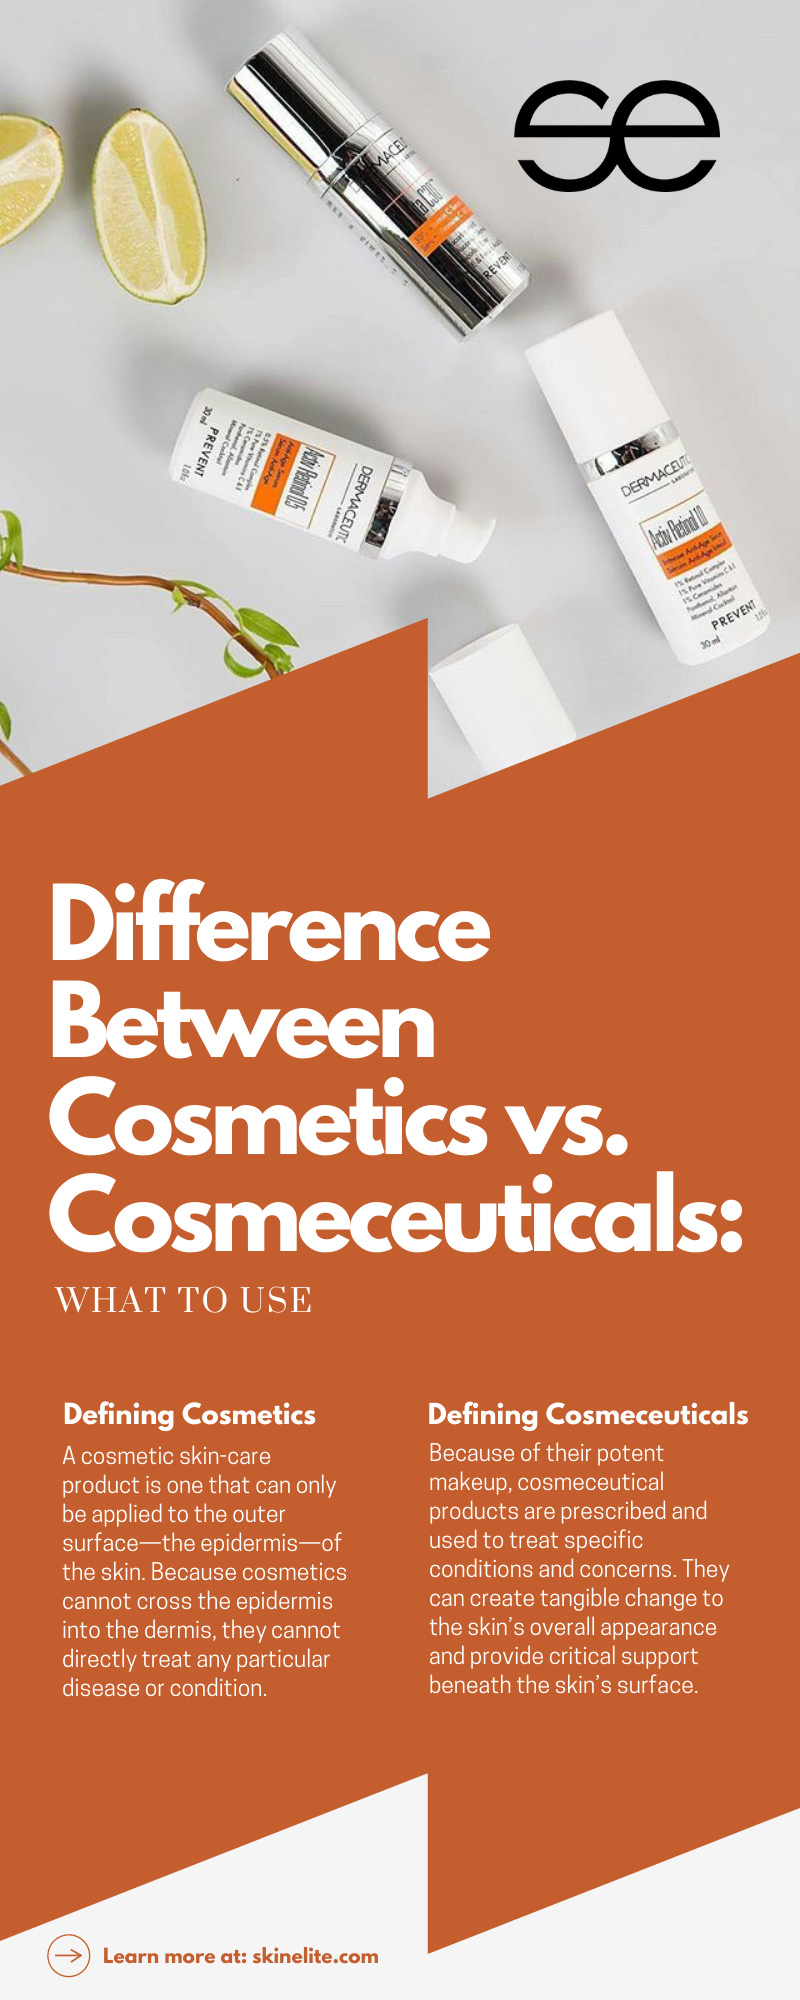 Difference Between Cosmetics vs. Cosmeceuticals: What To Use